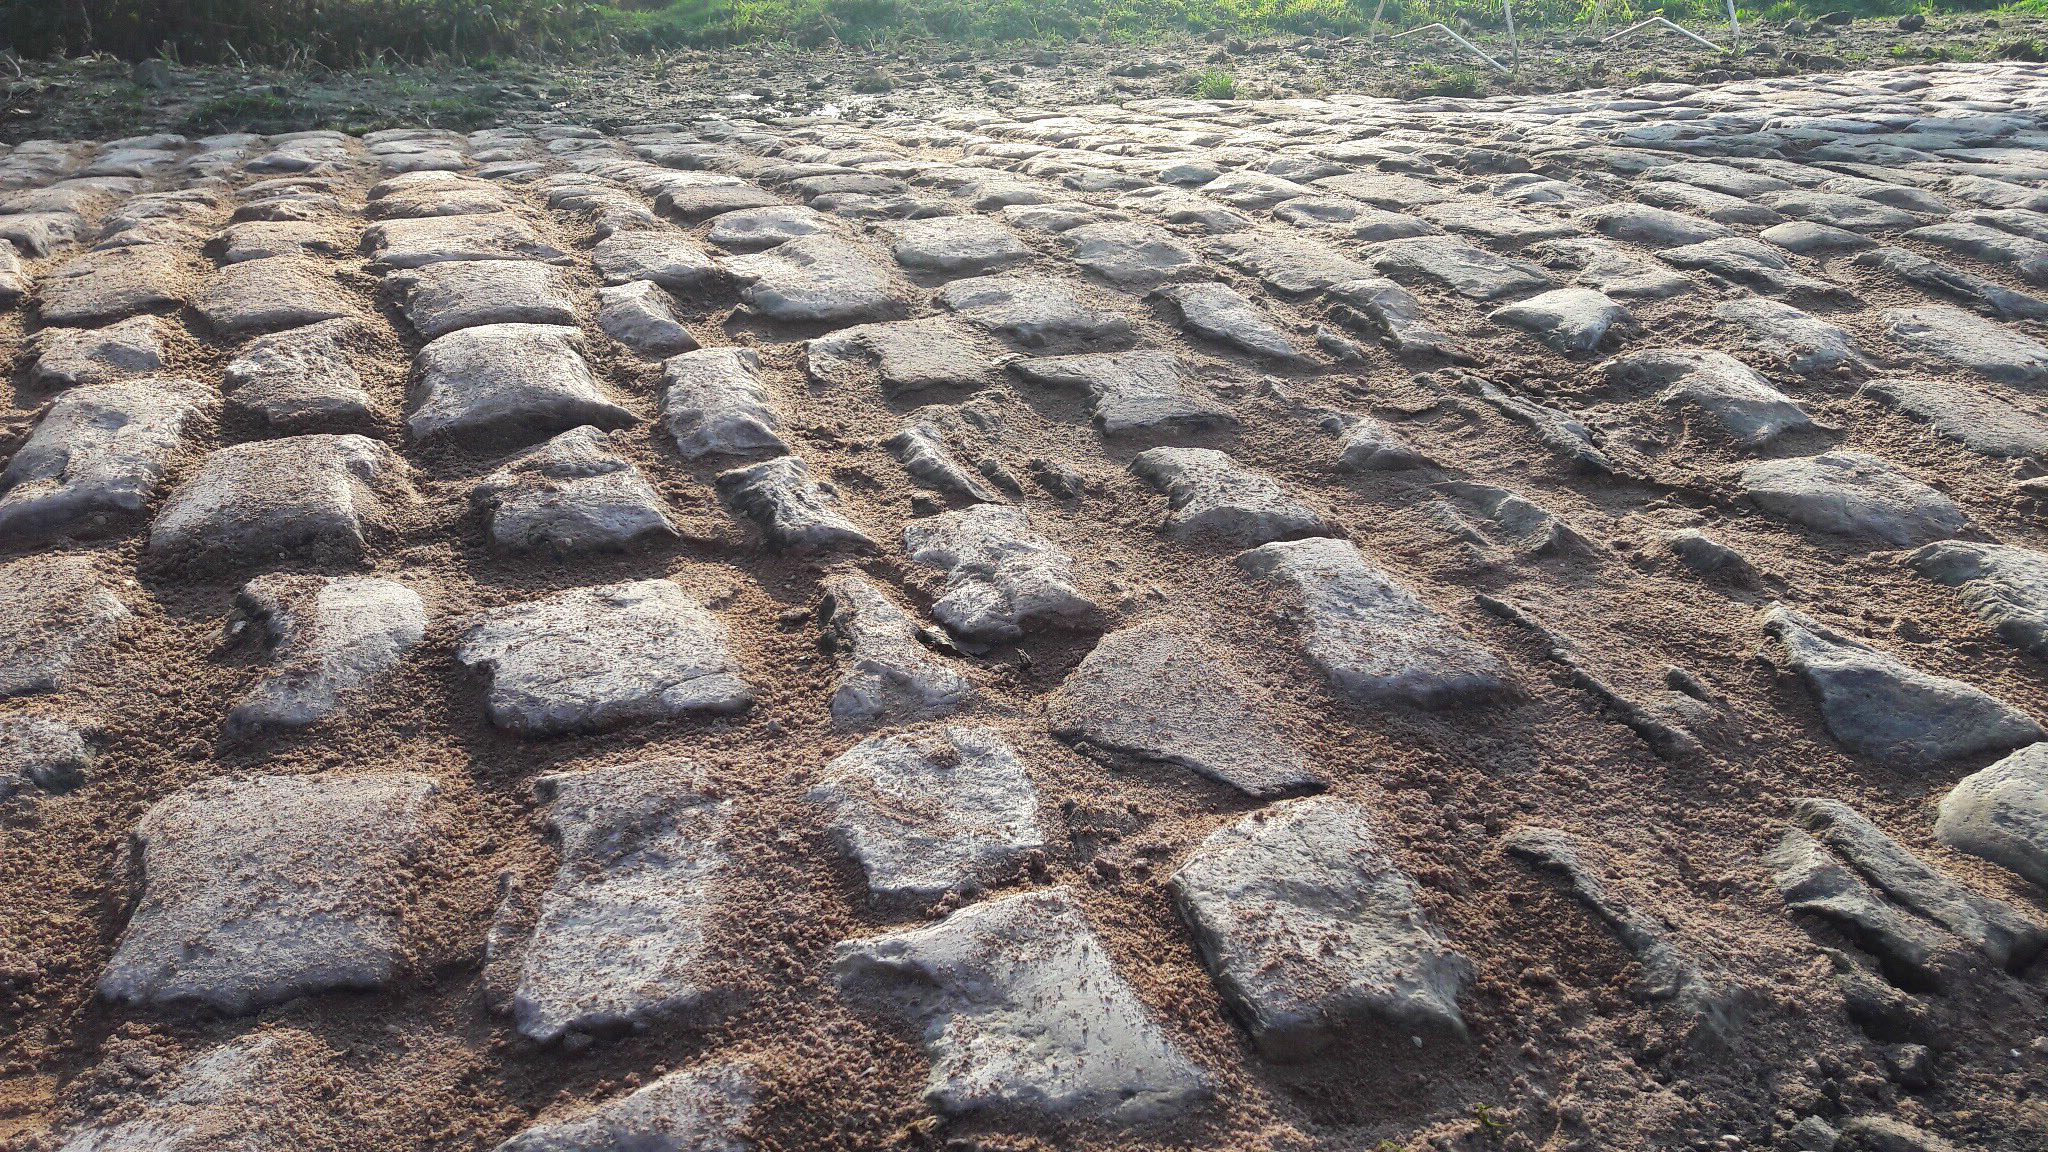 Imagine riding a road bike over these ancient bone-rattling stones on the Paris Roubaix course